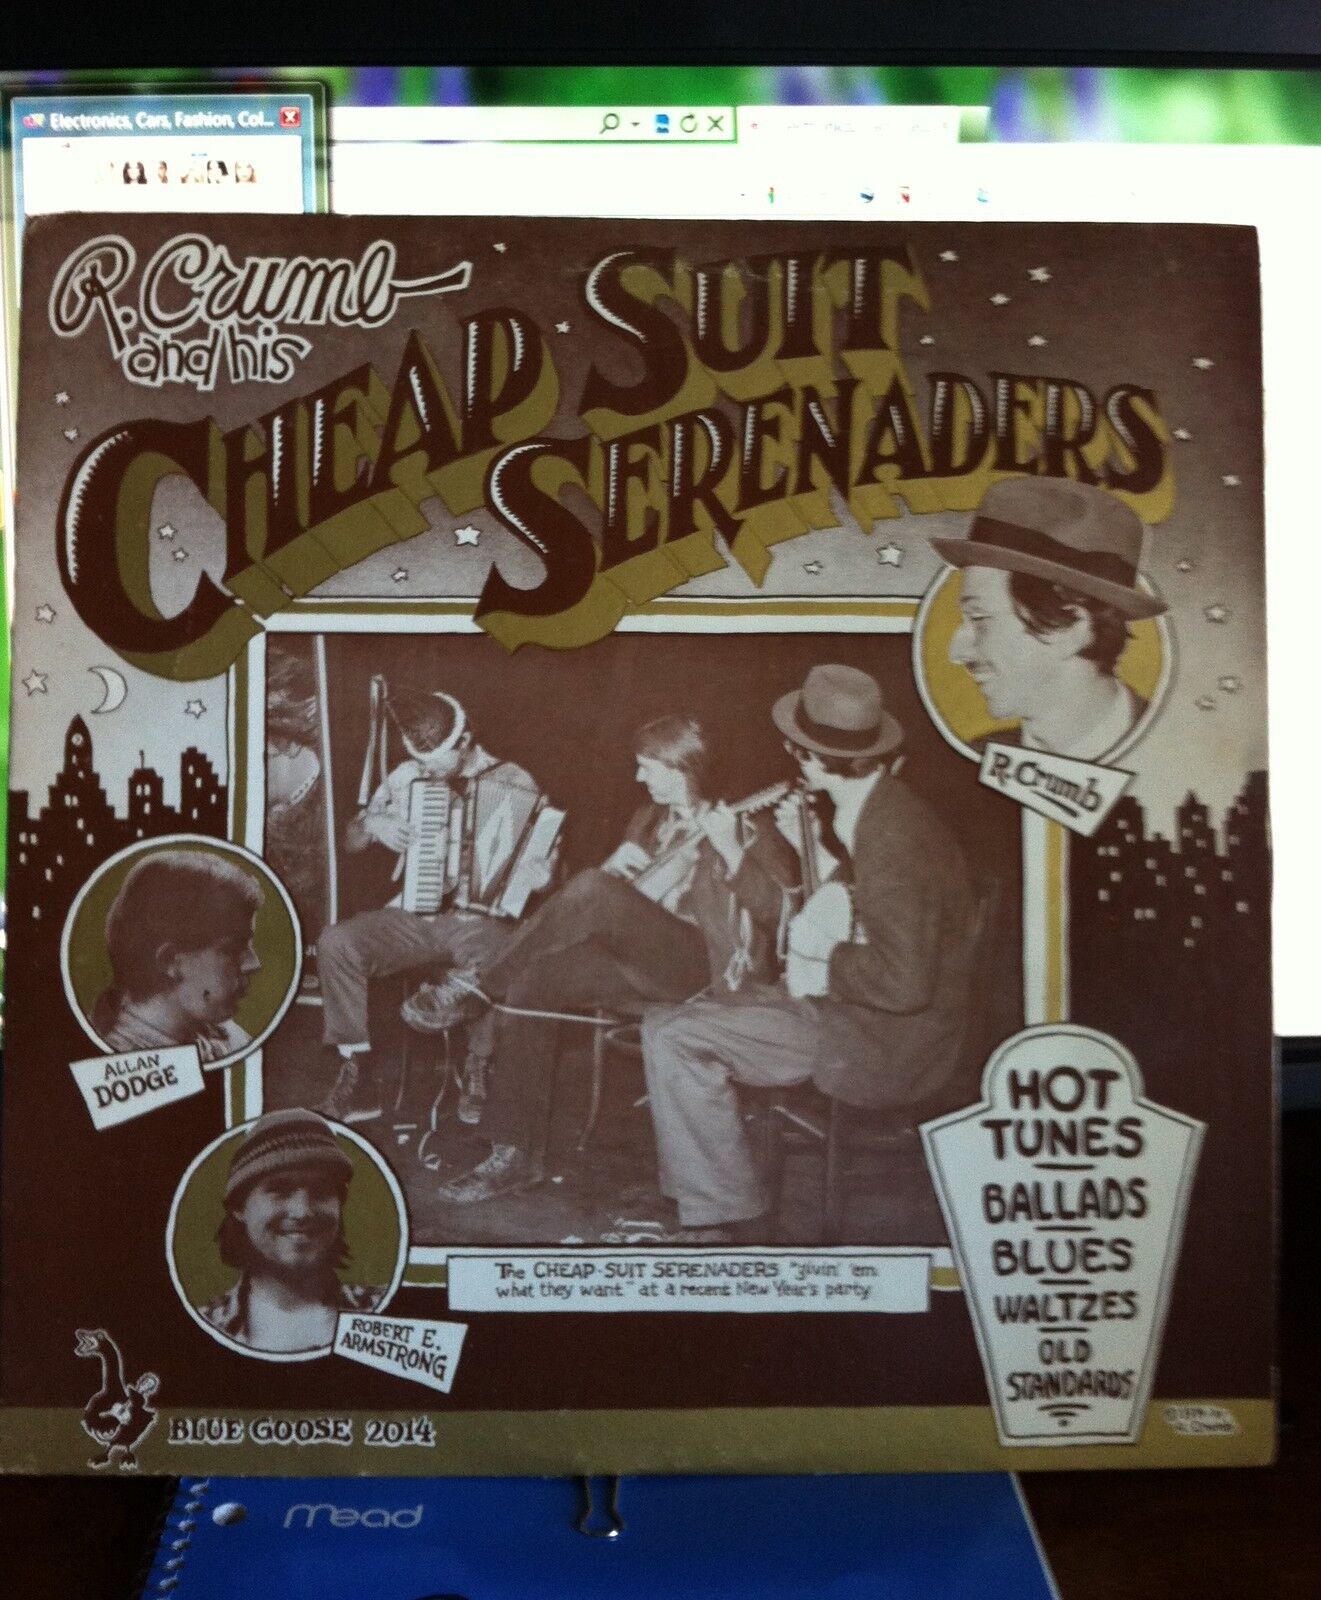 R. Crumb and his The Cheap Suit Serenaders LP Hot Tunes